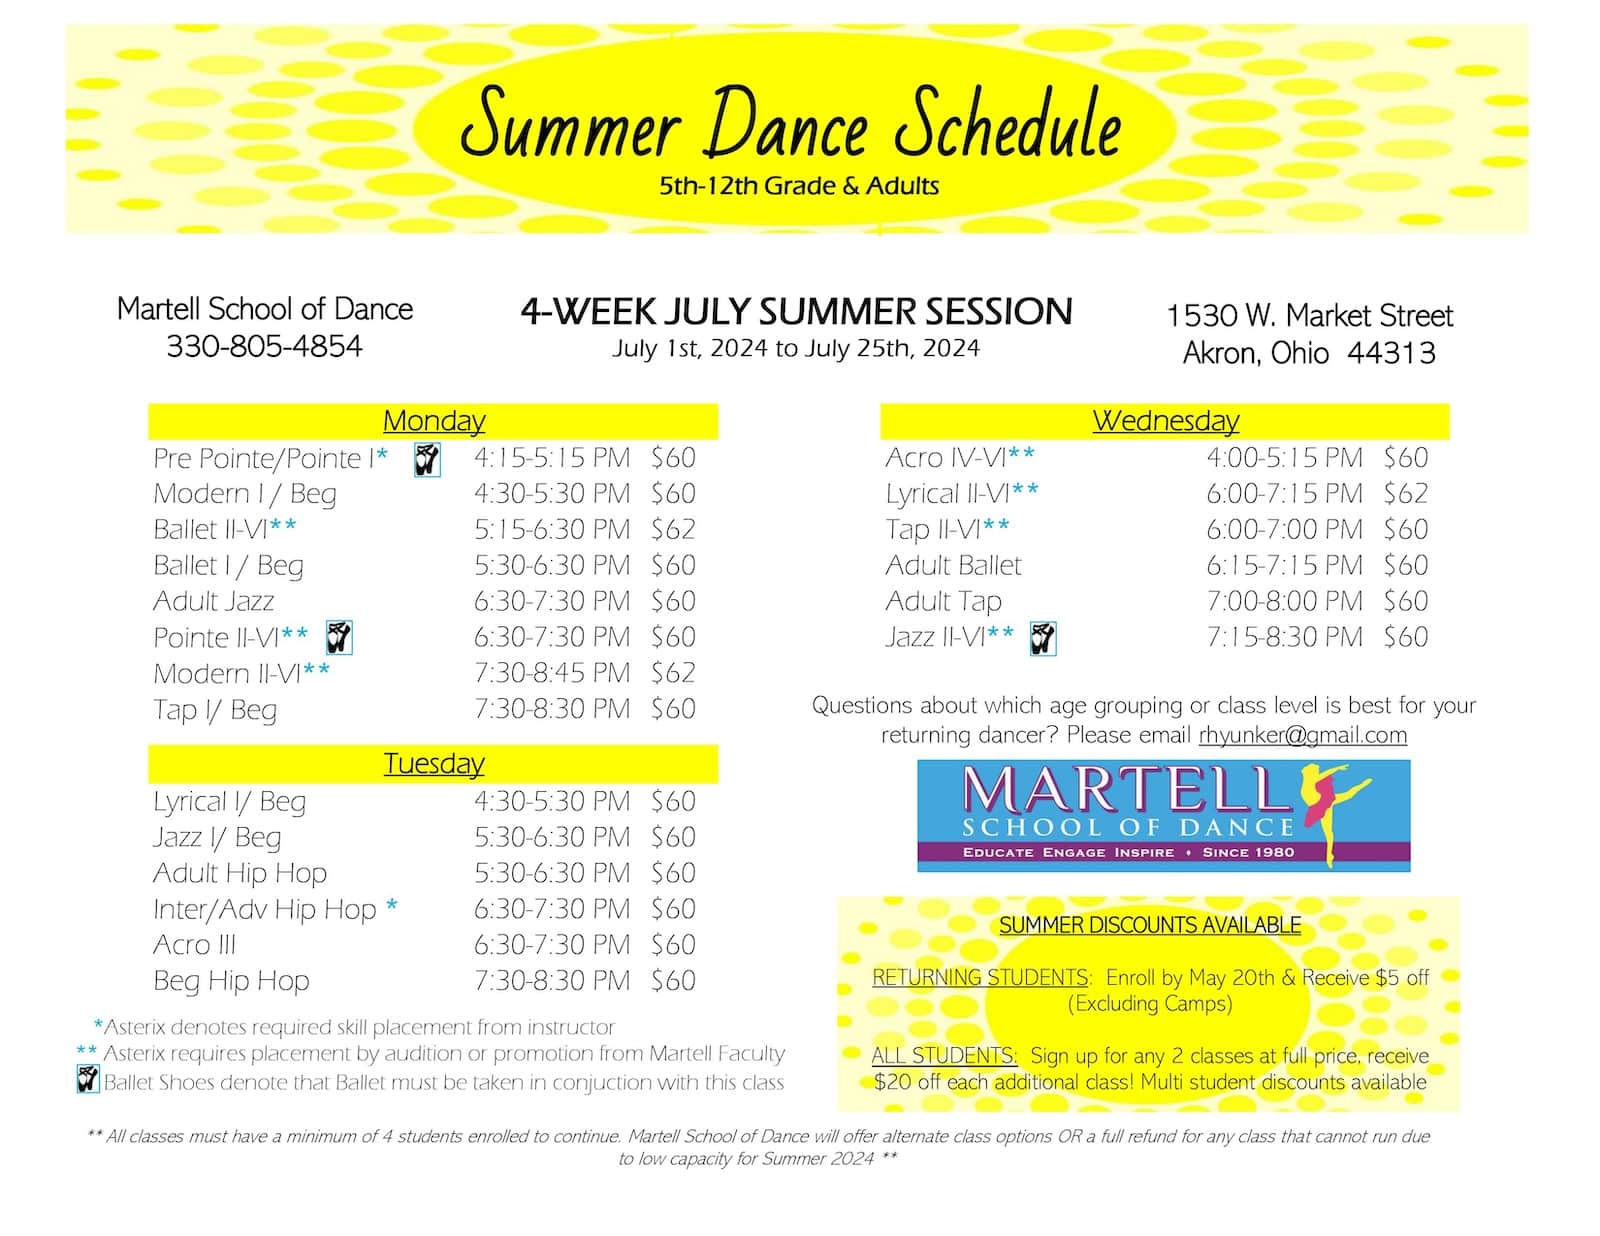 5th-12th Grade & Adults summer schedule